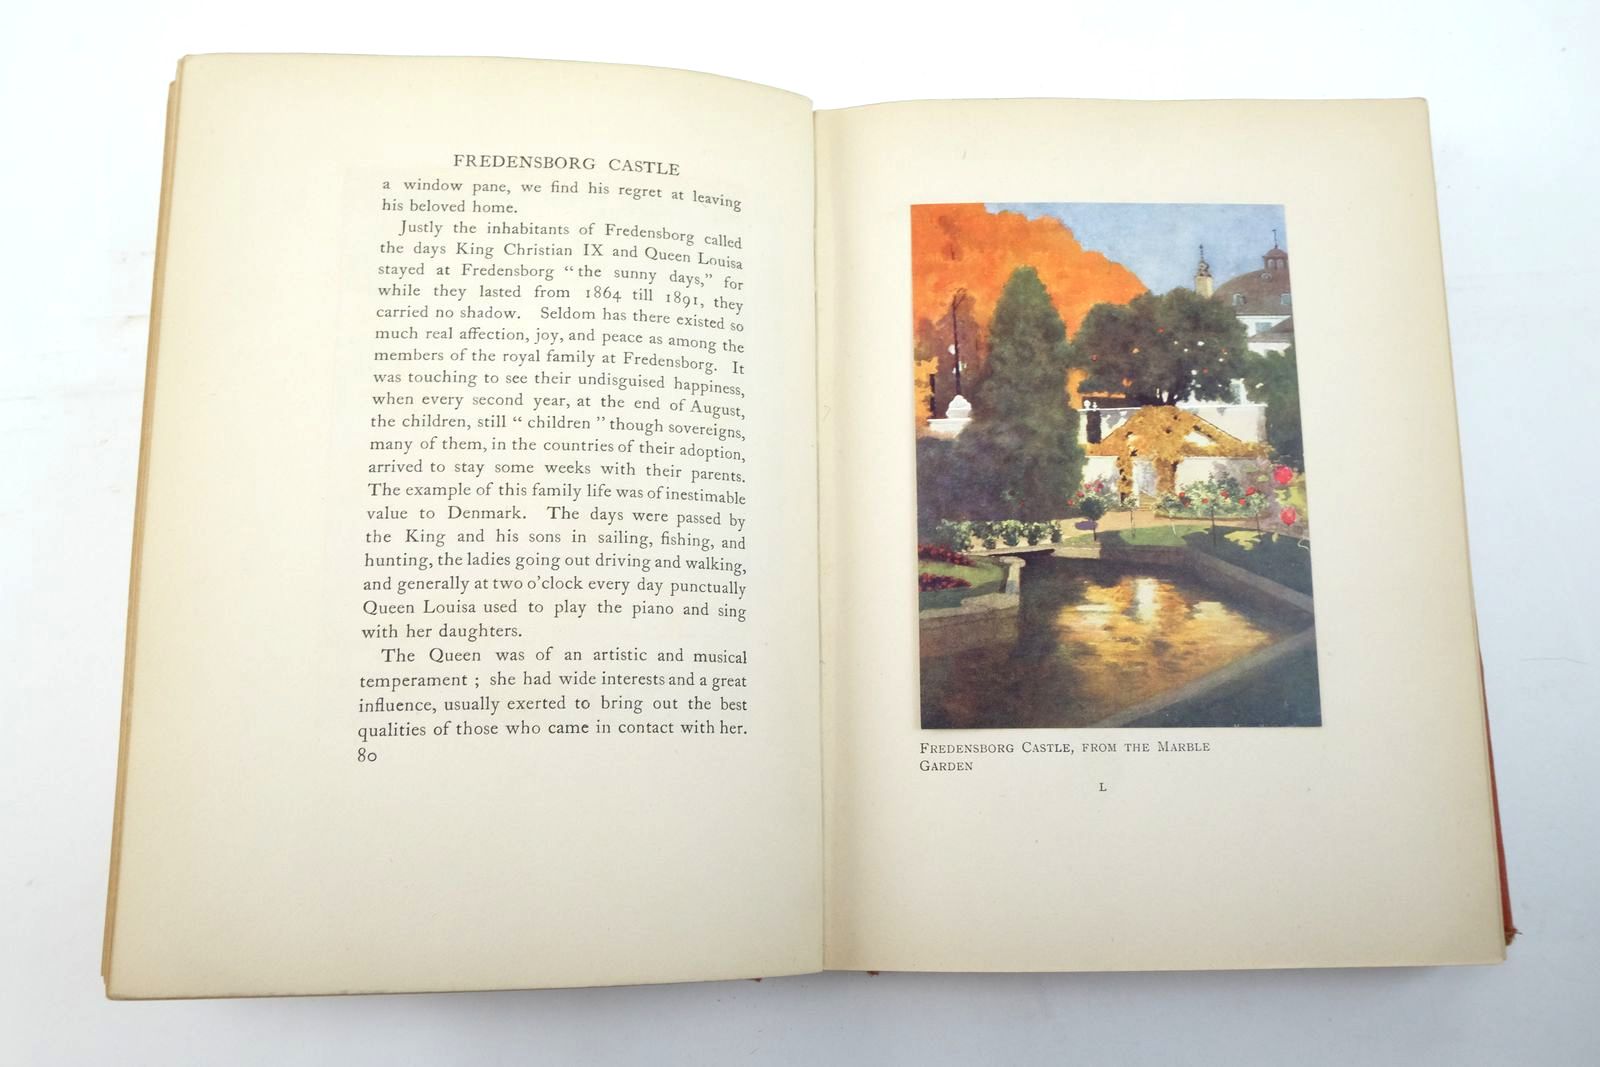 Photo of ROYAL PALACES AND GARDENS written by Nixon, Mima illustrated by Nixon, Mima published by A. & C. Black Ltd. (STOCK CODE: 2137169)  for sale by Stella & Rose's Books